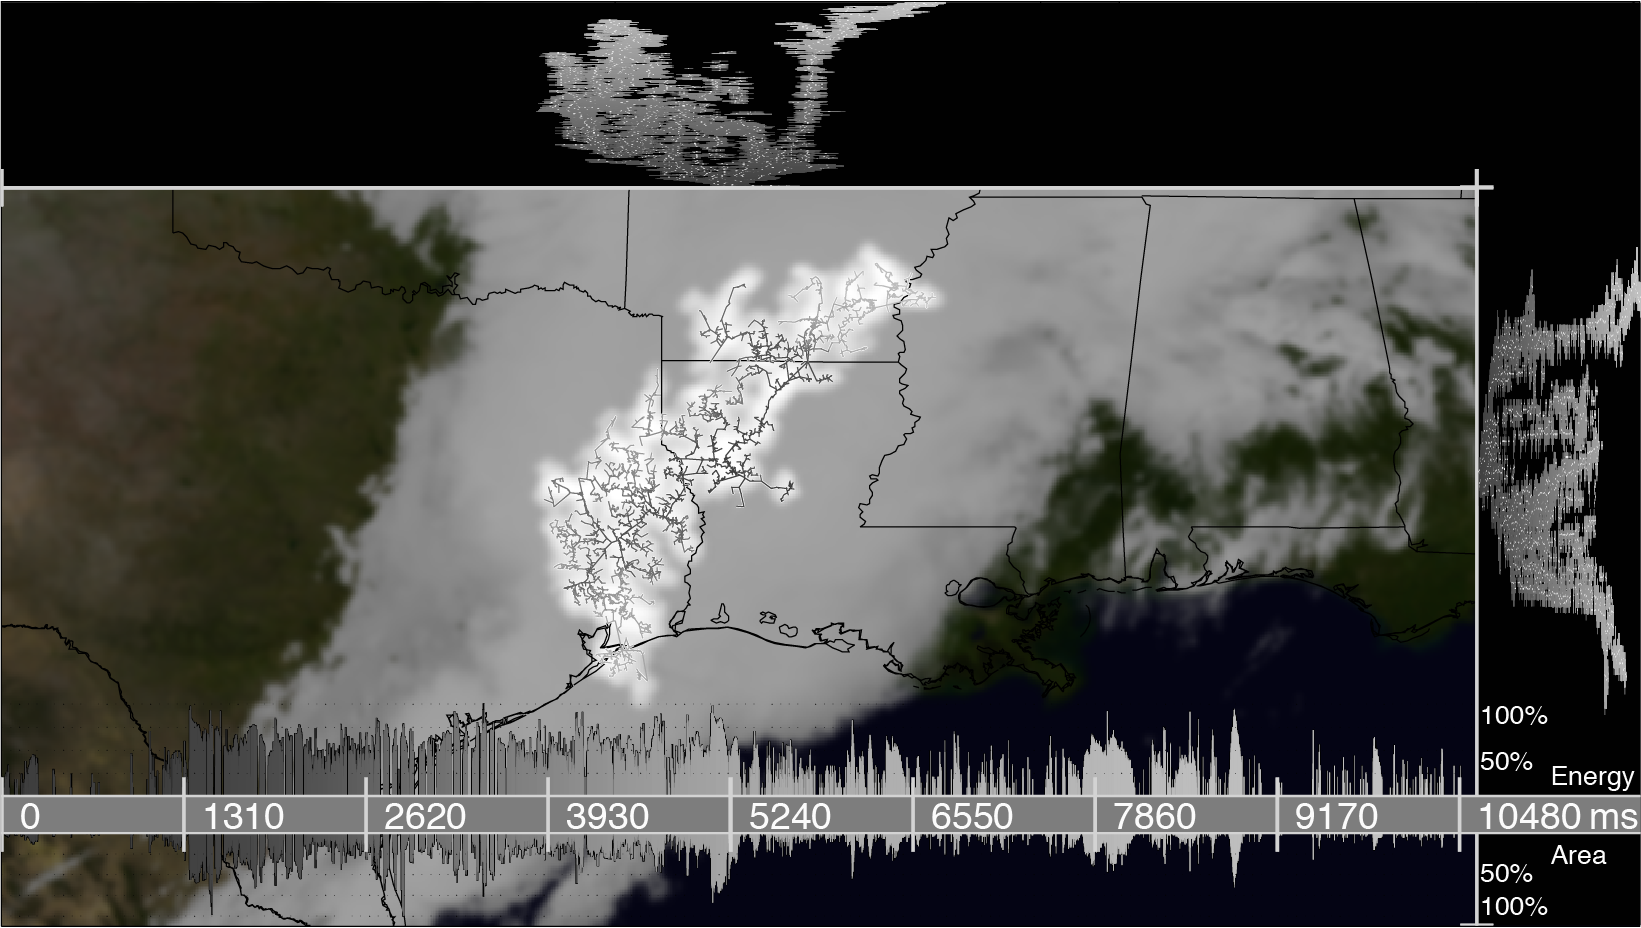 The largest lightning flash measured by the Geostationary Lightning Mapper in 2018. This monster flash encompassed parts of Texas, Louisiana, Missouri, and Mississippi. Lines trace the horizontal development of the flash in time from first light (dark gray) to the final pulse (light gray). The top and right panels show the latitude/longitude extents of every pulse in the flash over time, while the bottom time series documents changes in pulse energy (top) and area (bottom) over the course of the flash.